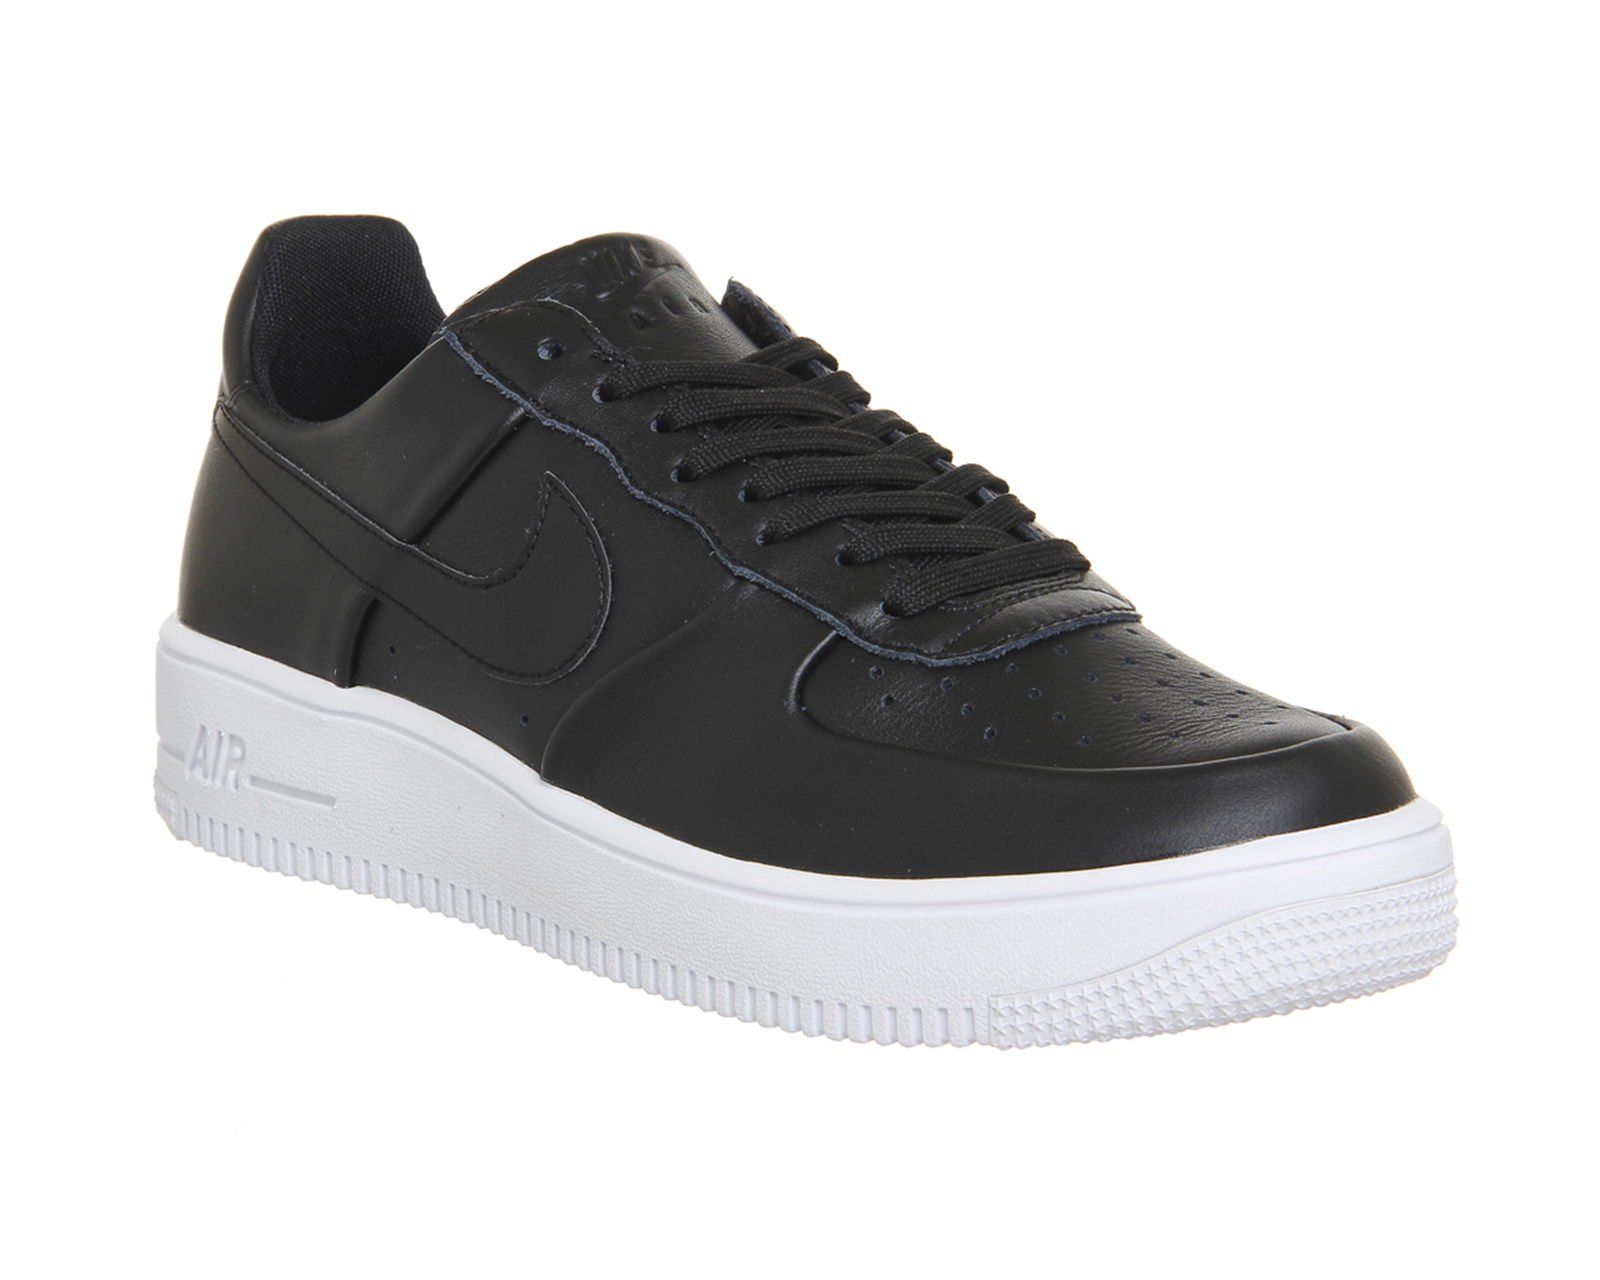 Nike Af1 Ultra Force Black White Leather - His trainers